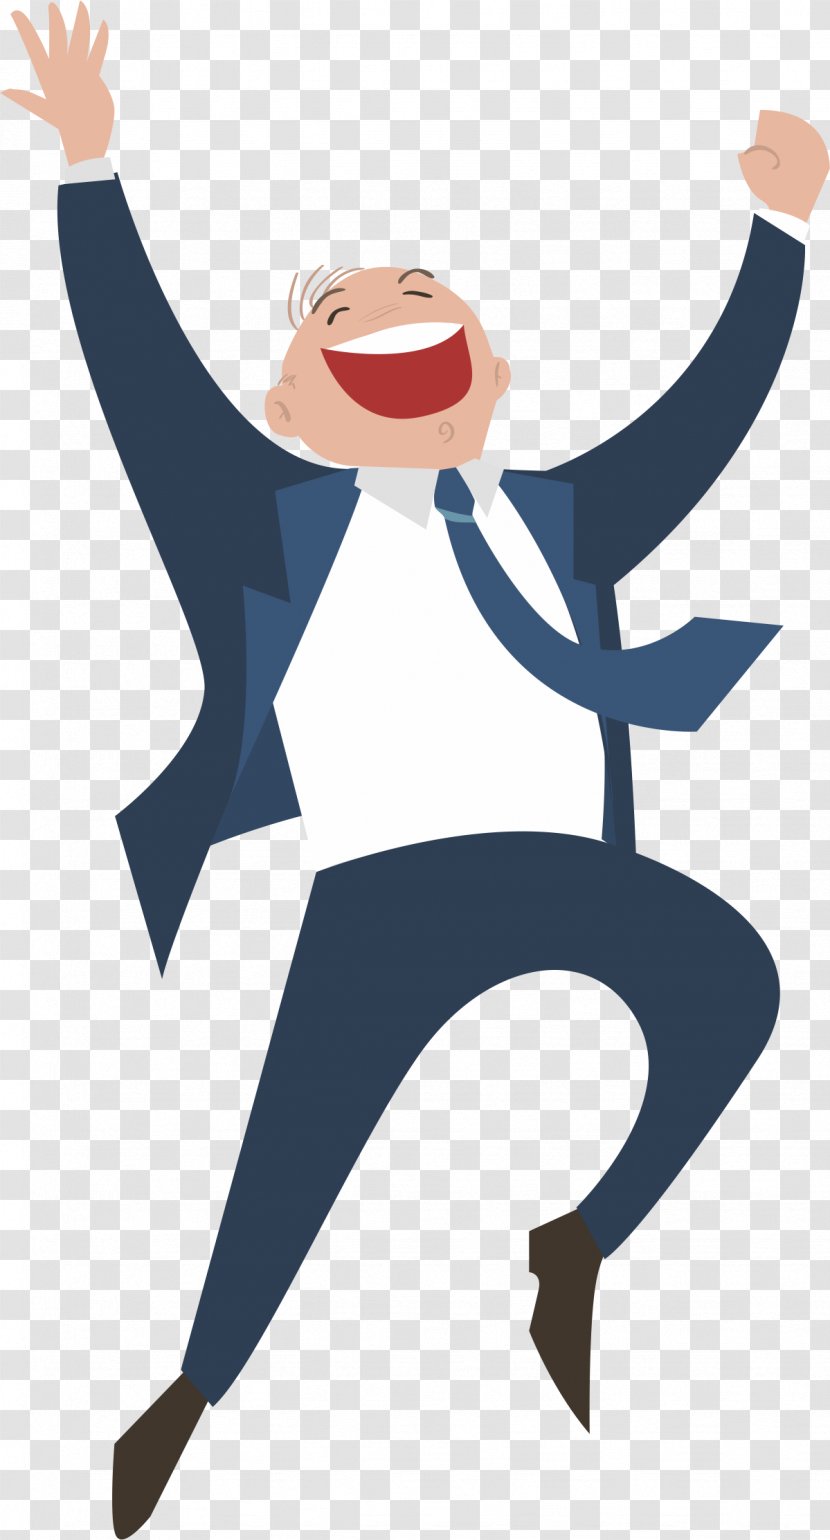 Happiness Illustration - Heart - Laughing Man Transparent PNG